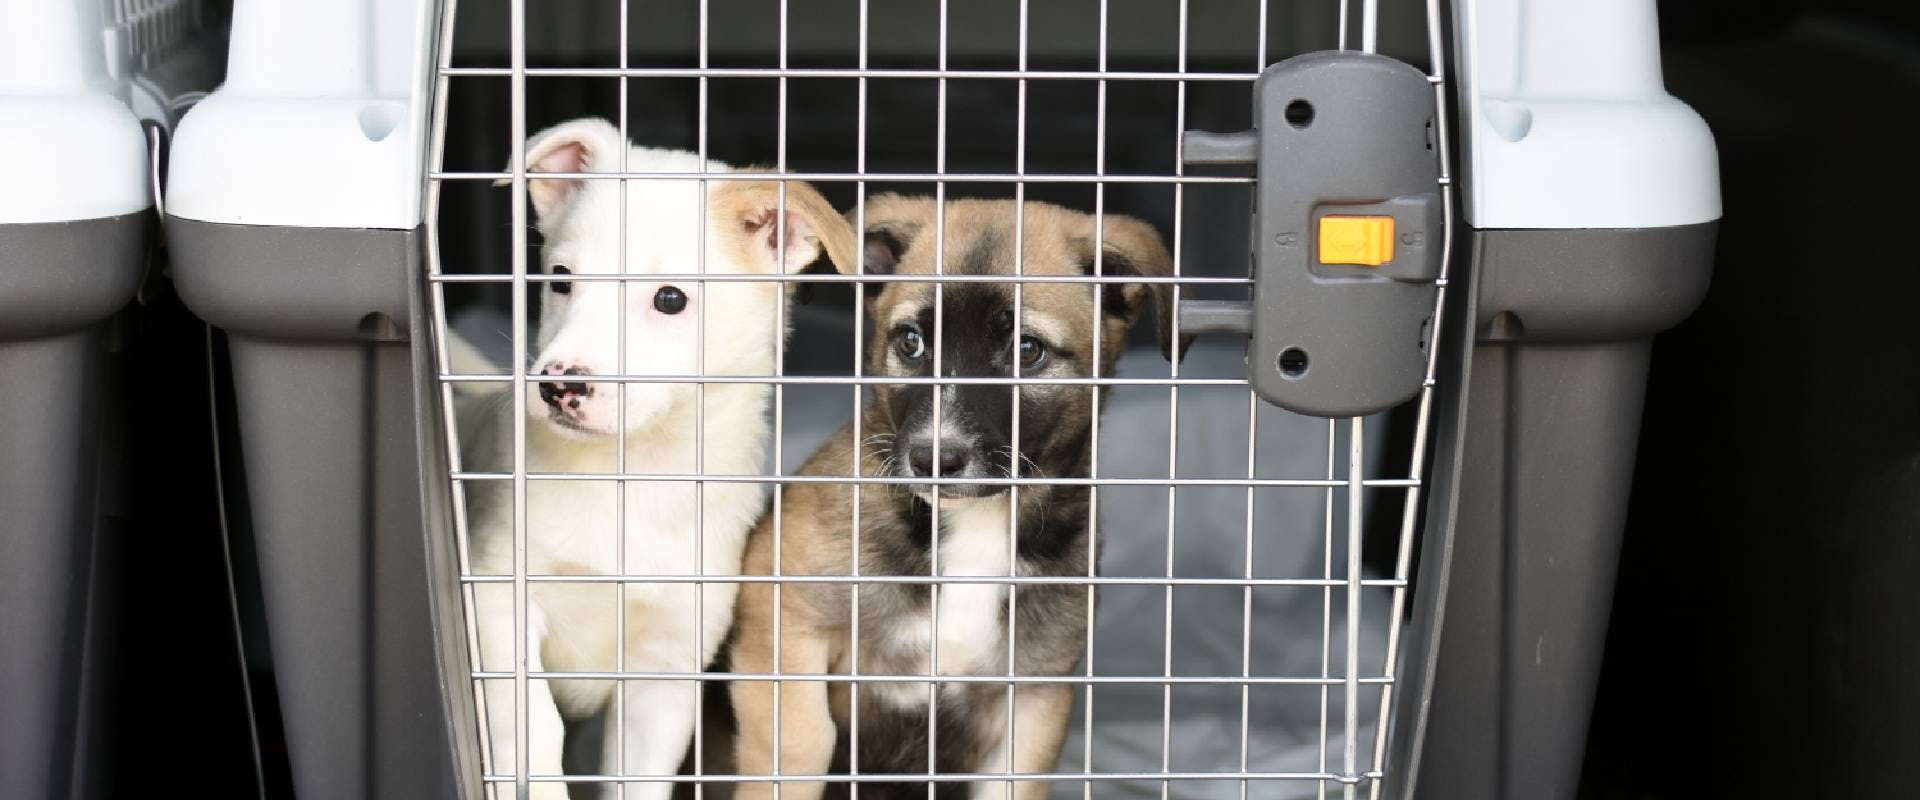 puppies in a container for transporting animals